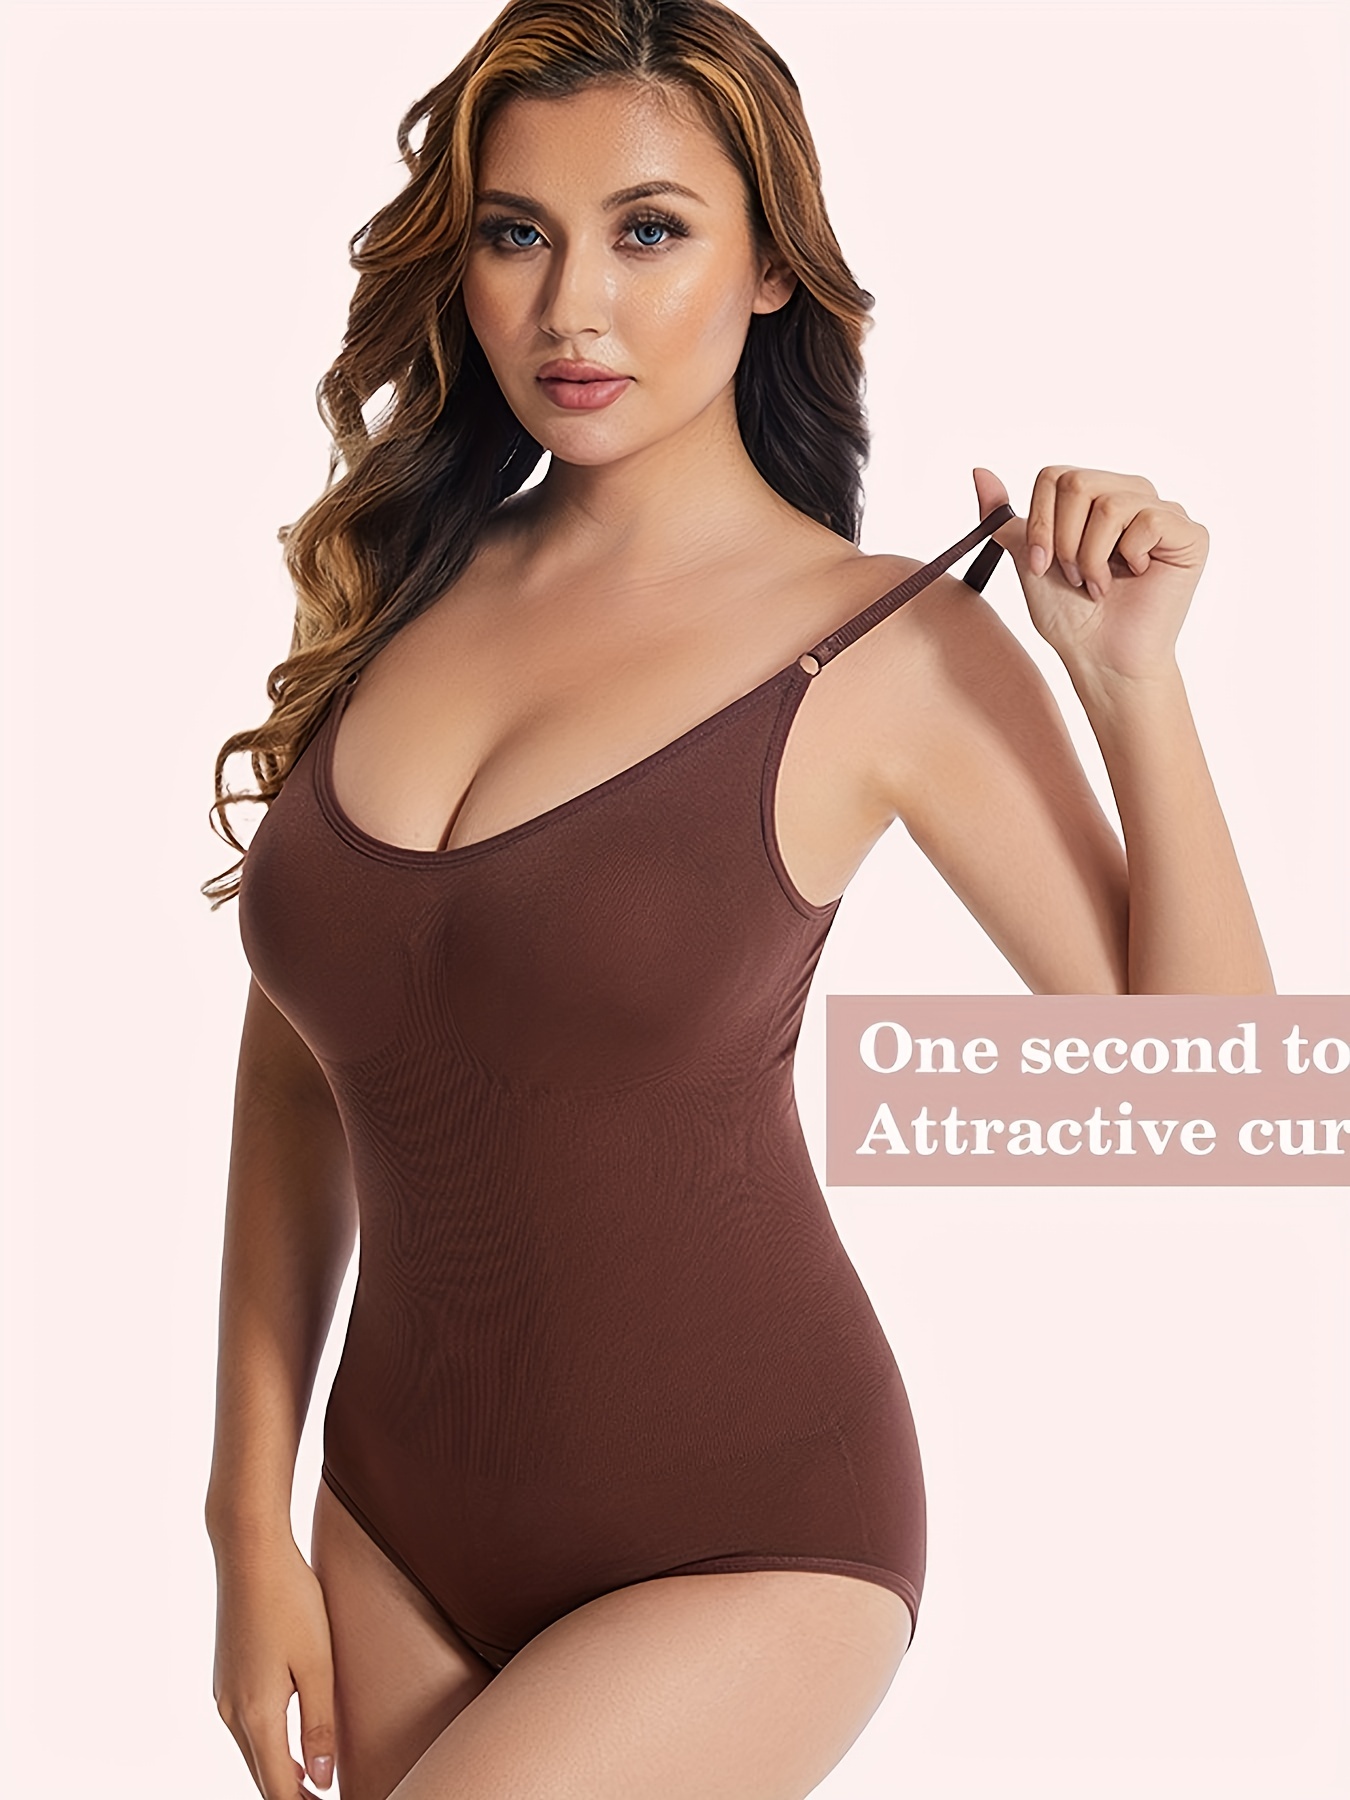 Women's One-piece Body Shaping Clothes Women's Underwear Body Shaping  Clothes